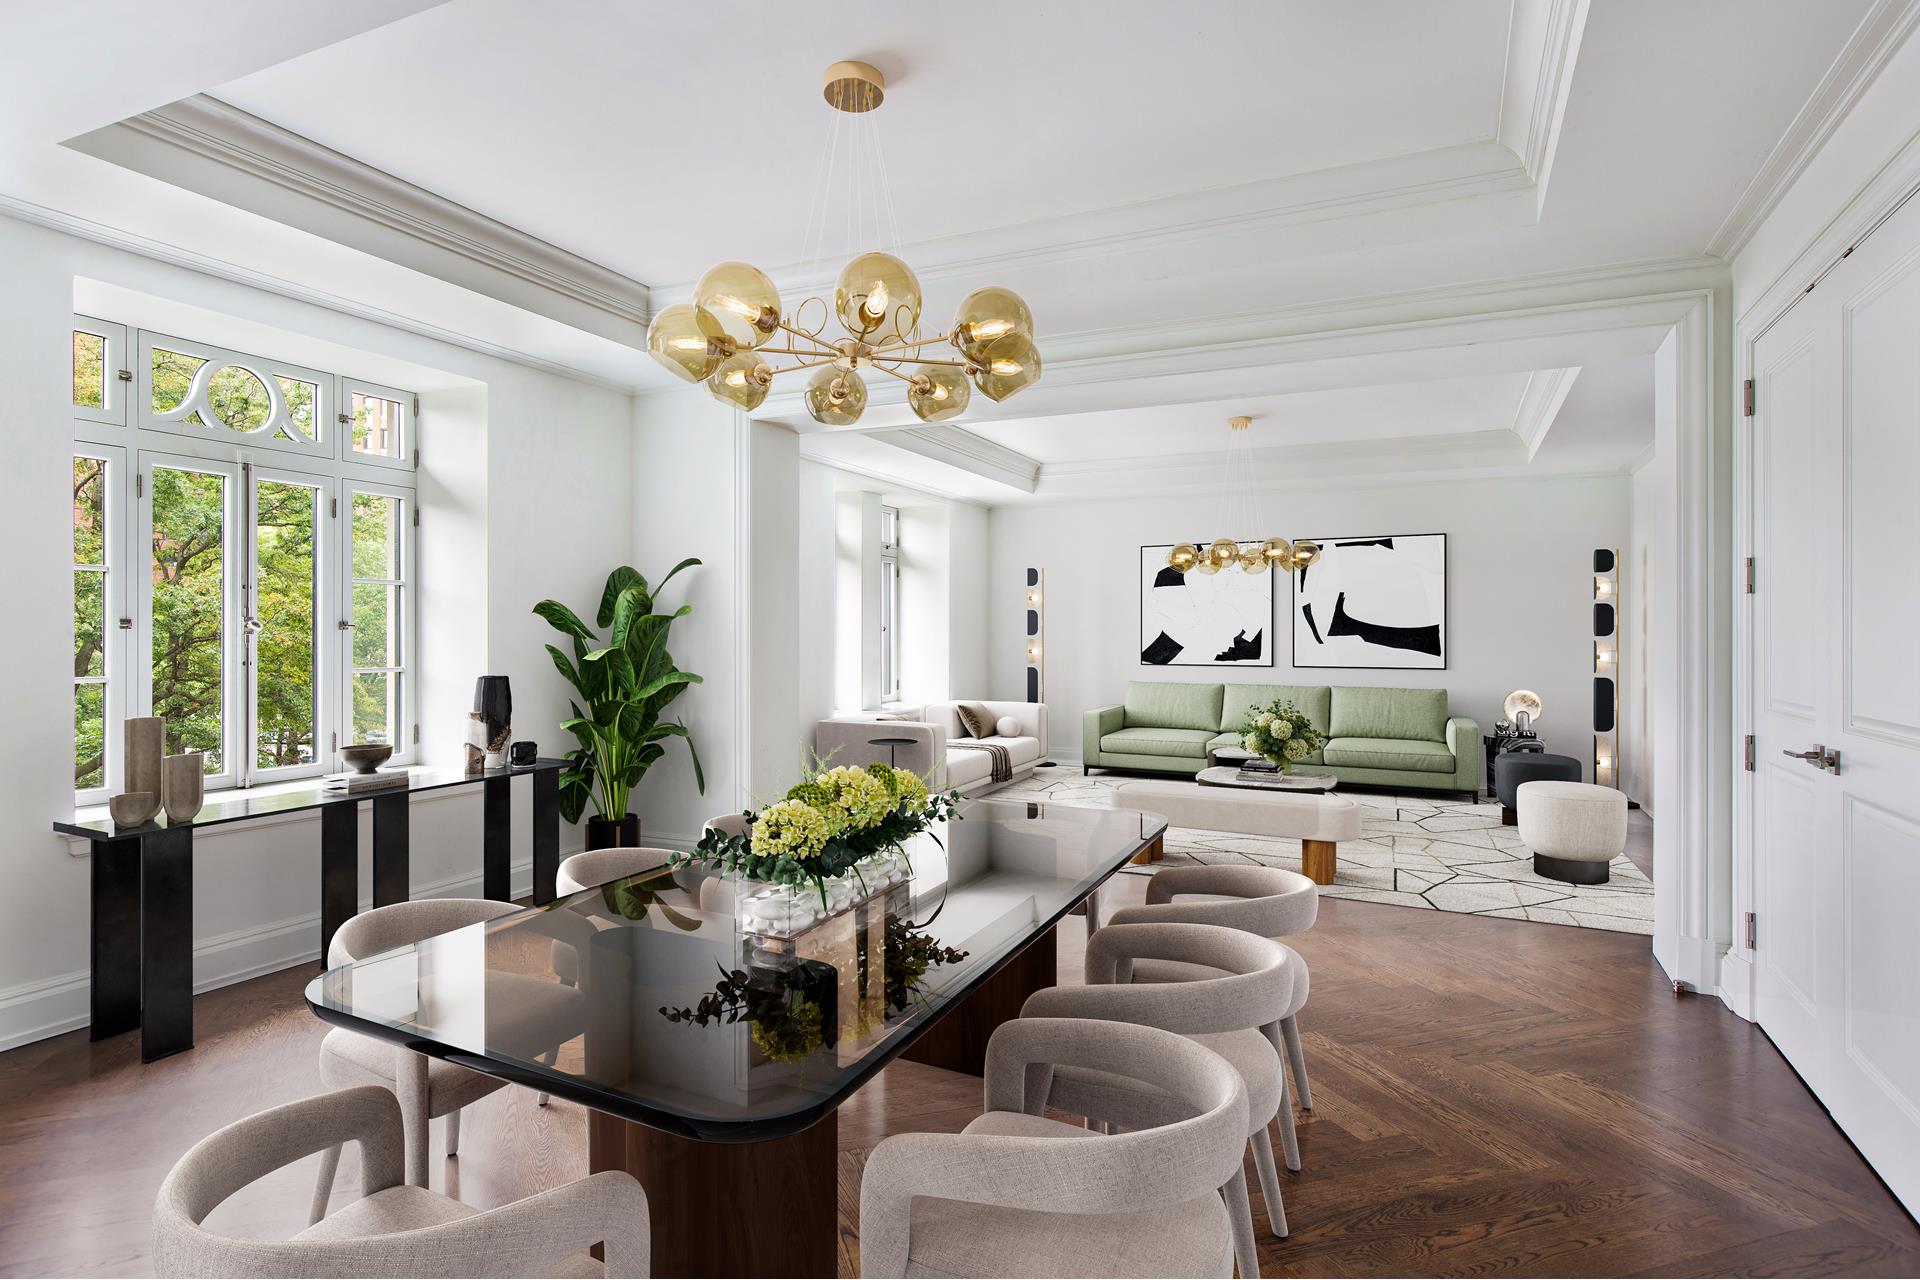 344 West 72nd Street 301, Lincoln Sq, Upper West Side, NYC - 5 Bedrooms  
5.5 Bathrooms  
8 Rooms - 